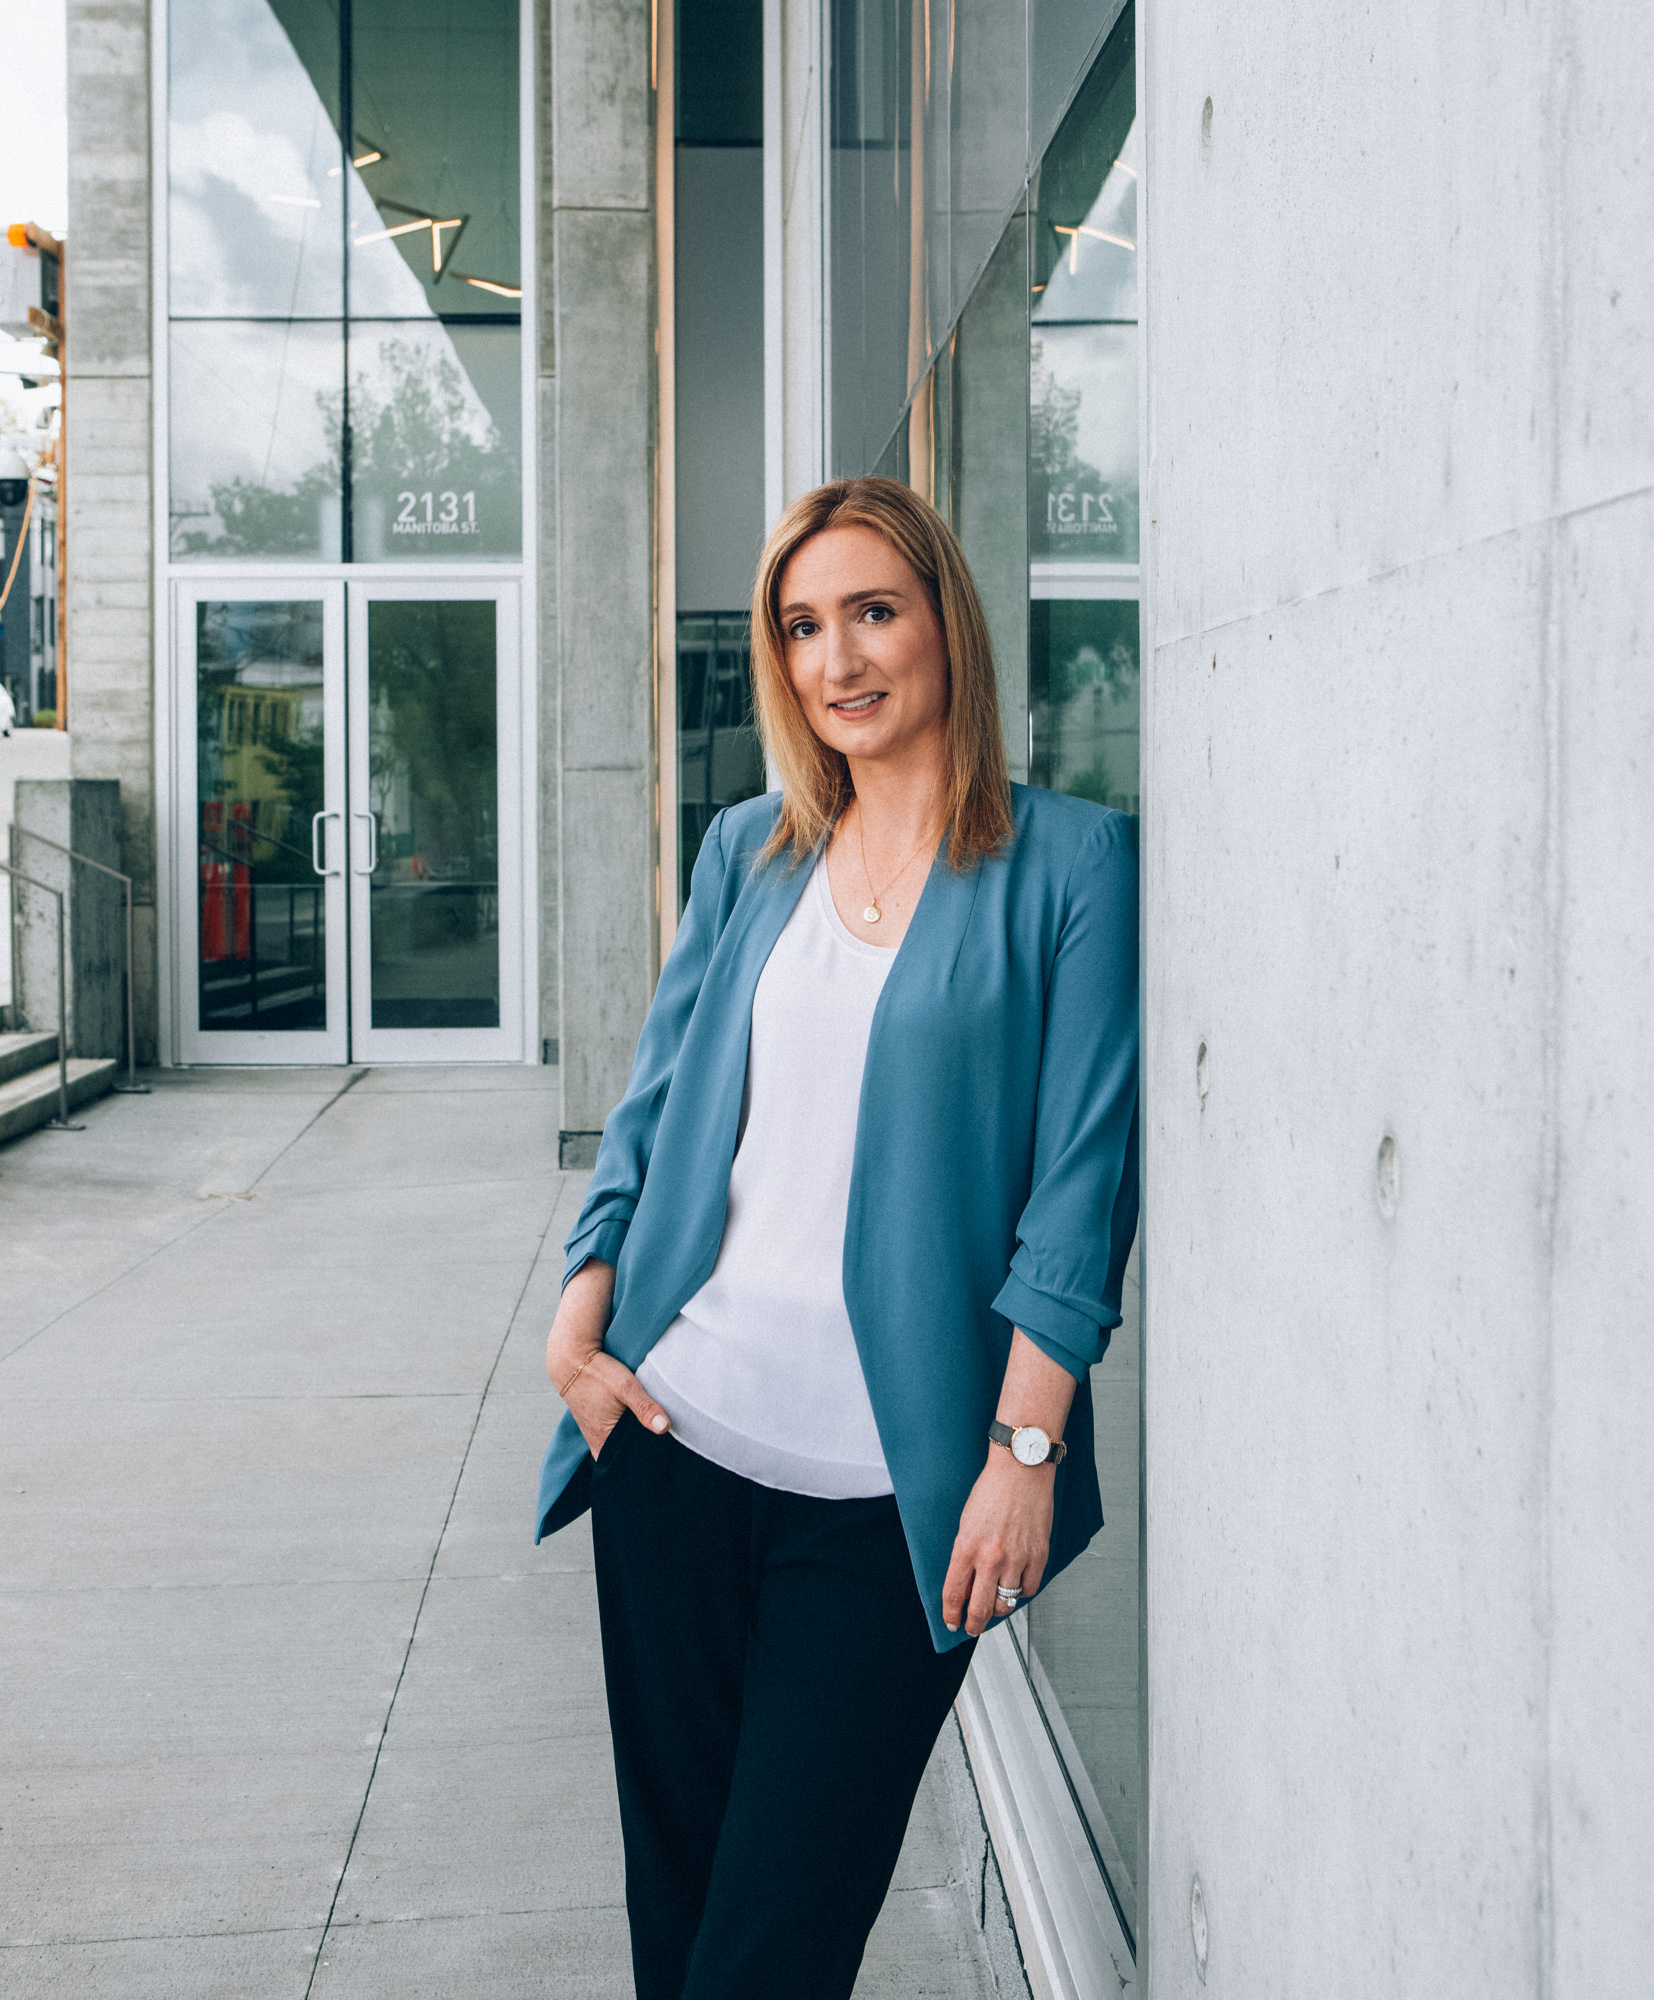 Sarah Small, Vice President of HR at Third Space Properties, posing against a building in Vancouver.